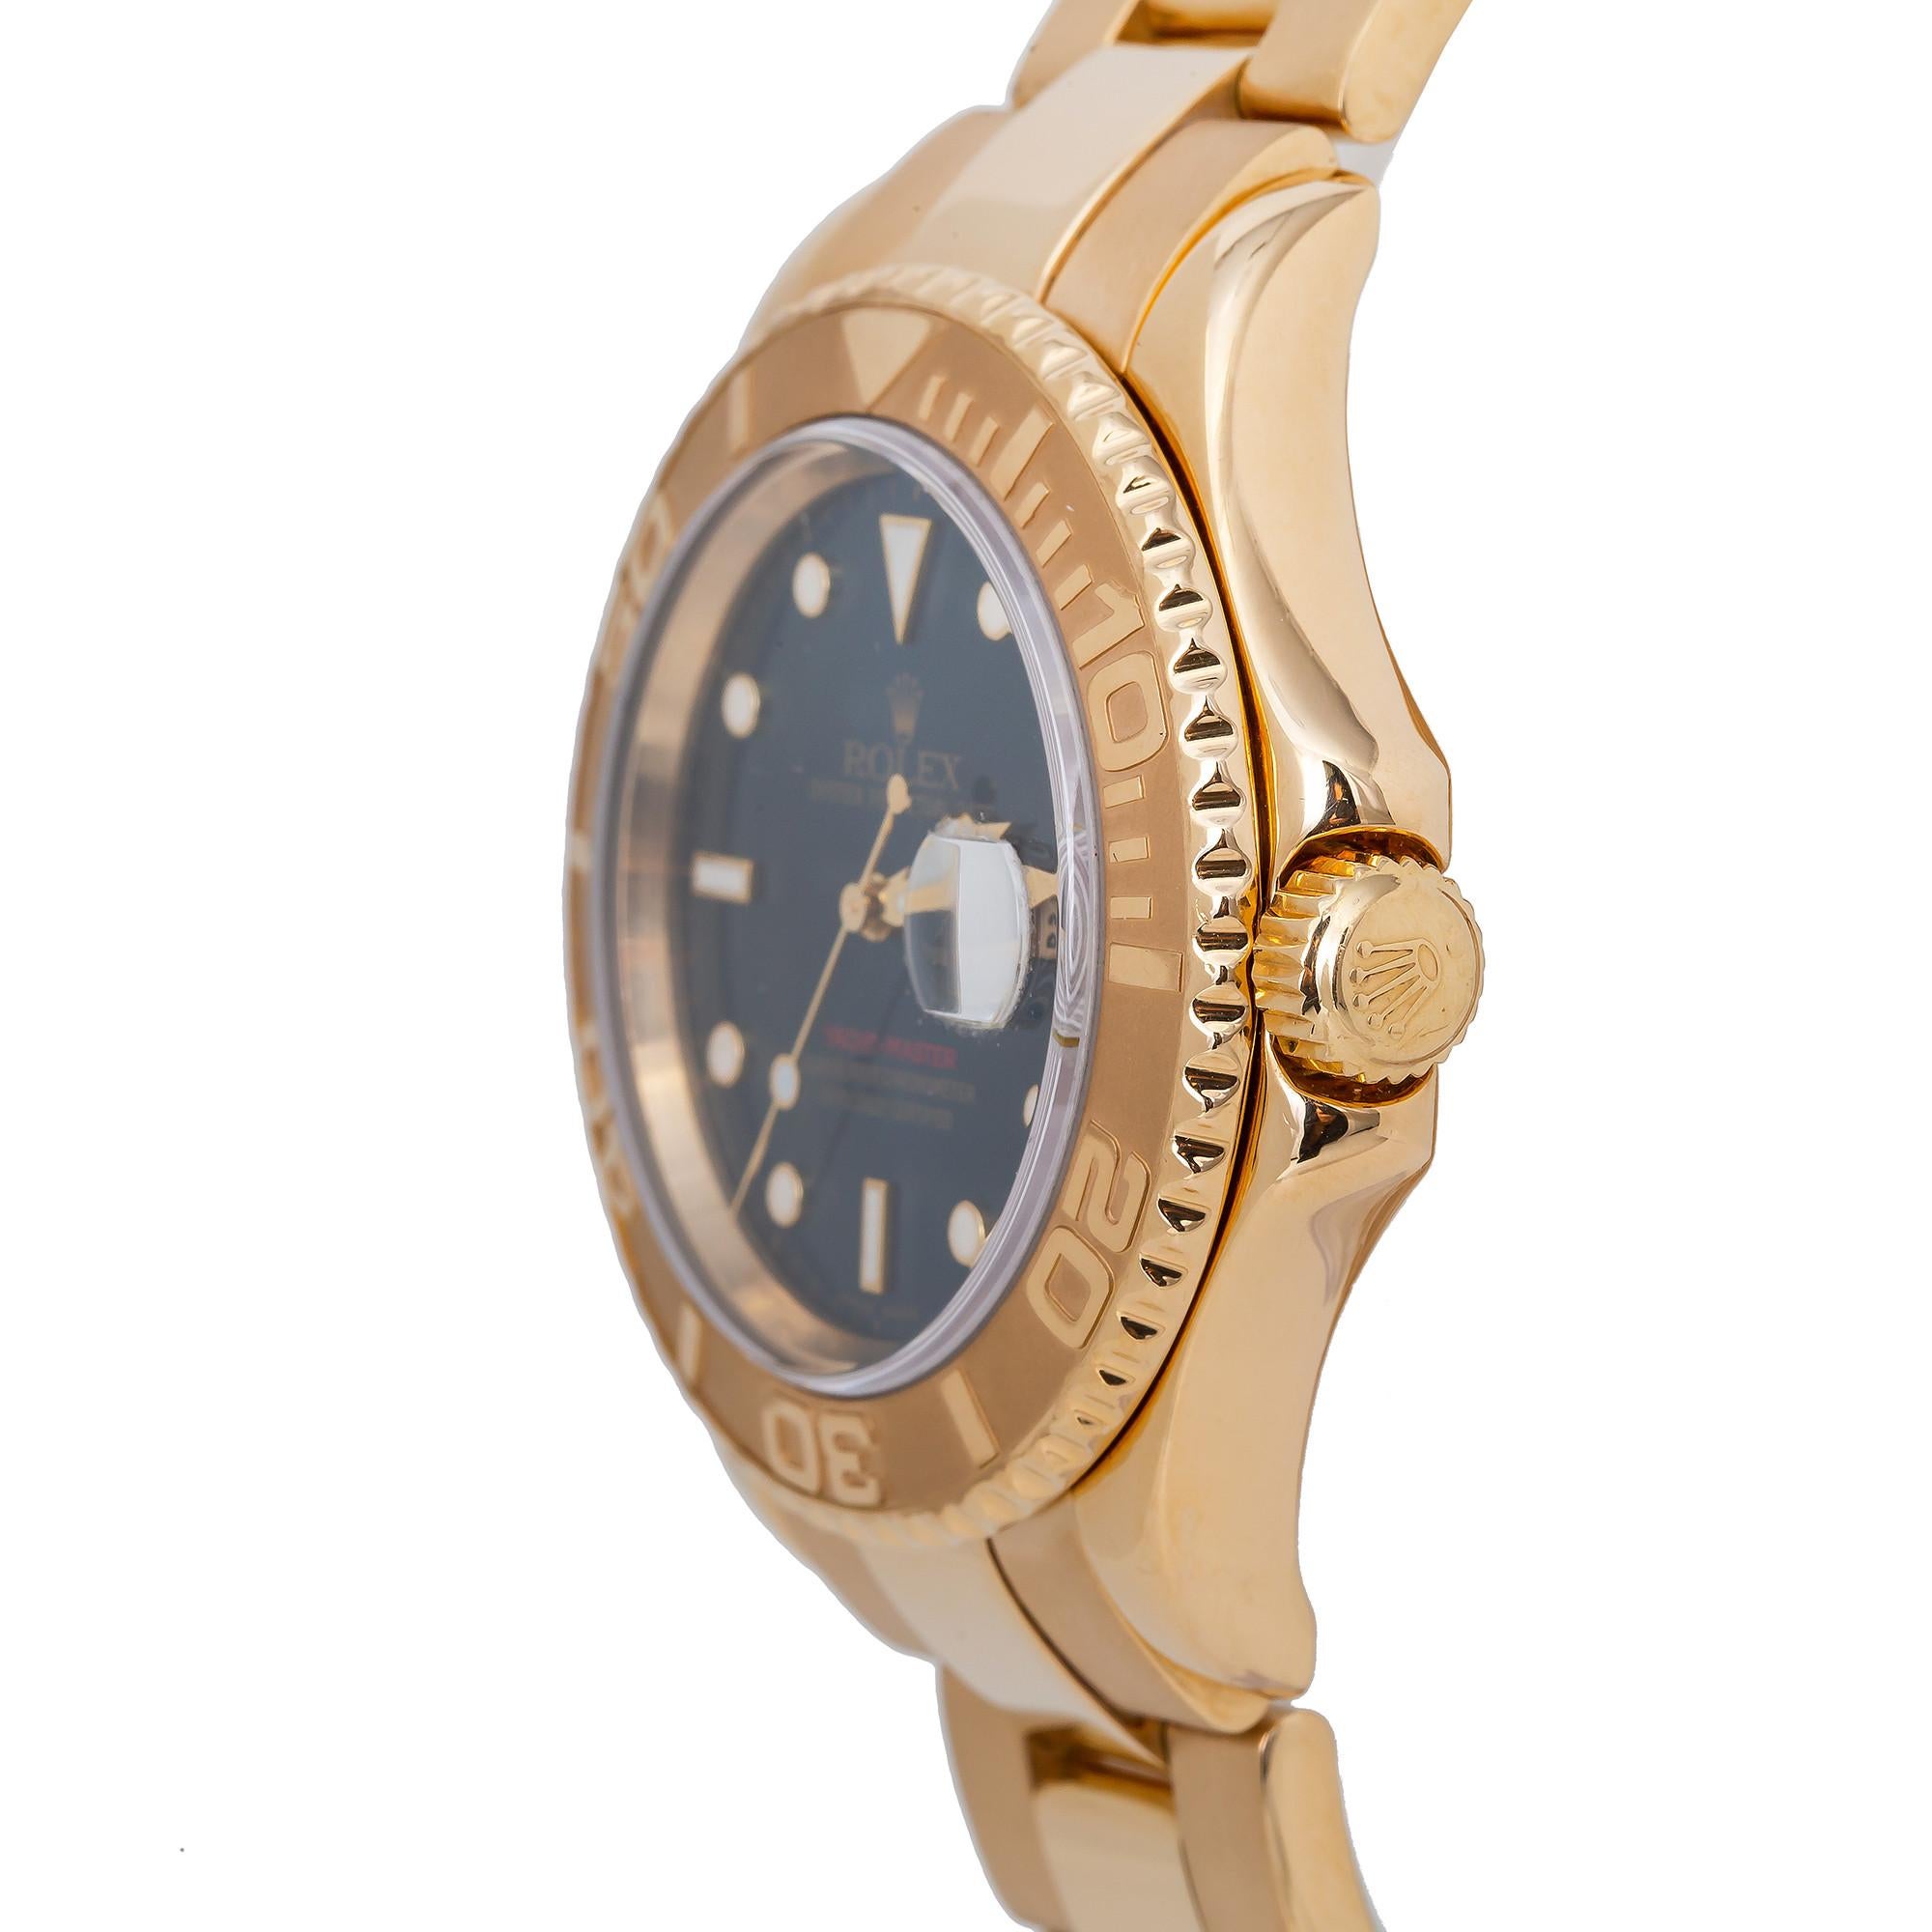 blue and gold rolex yacht master